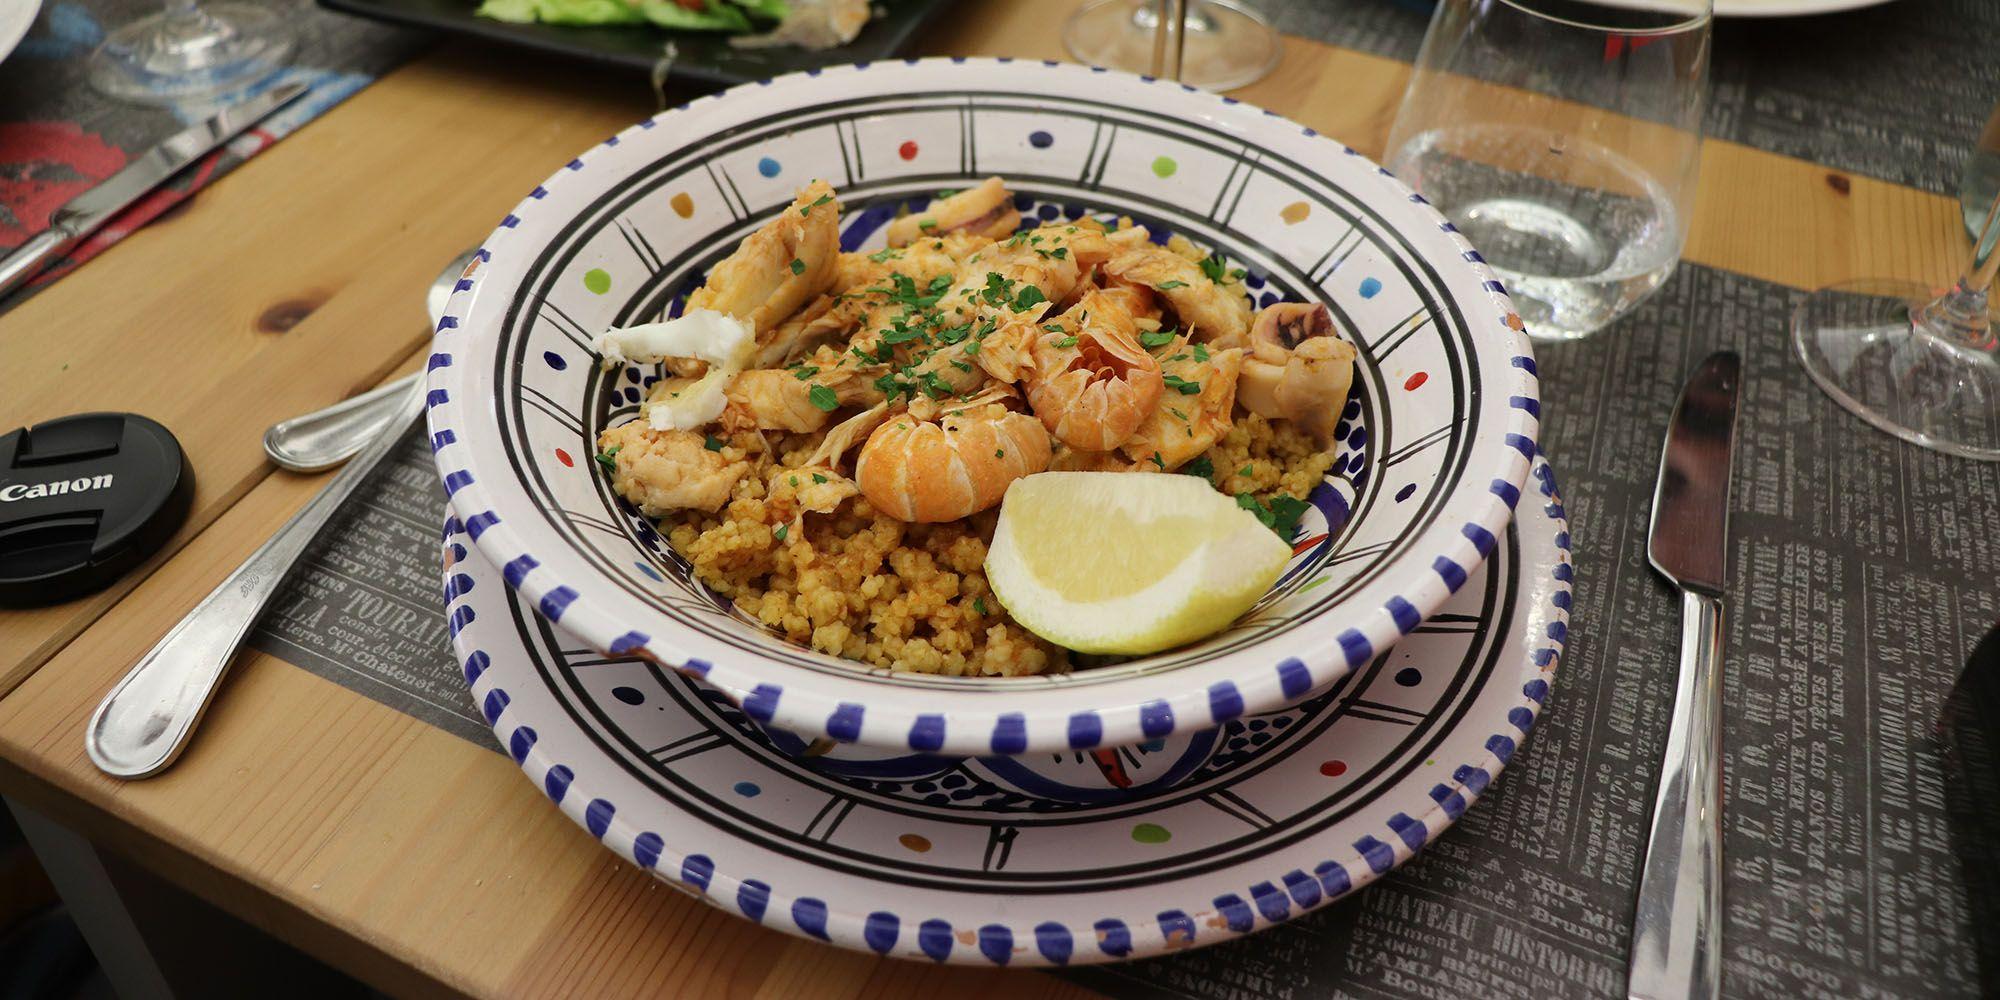 A fish couscous for the culturally curious